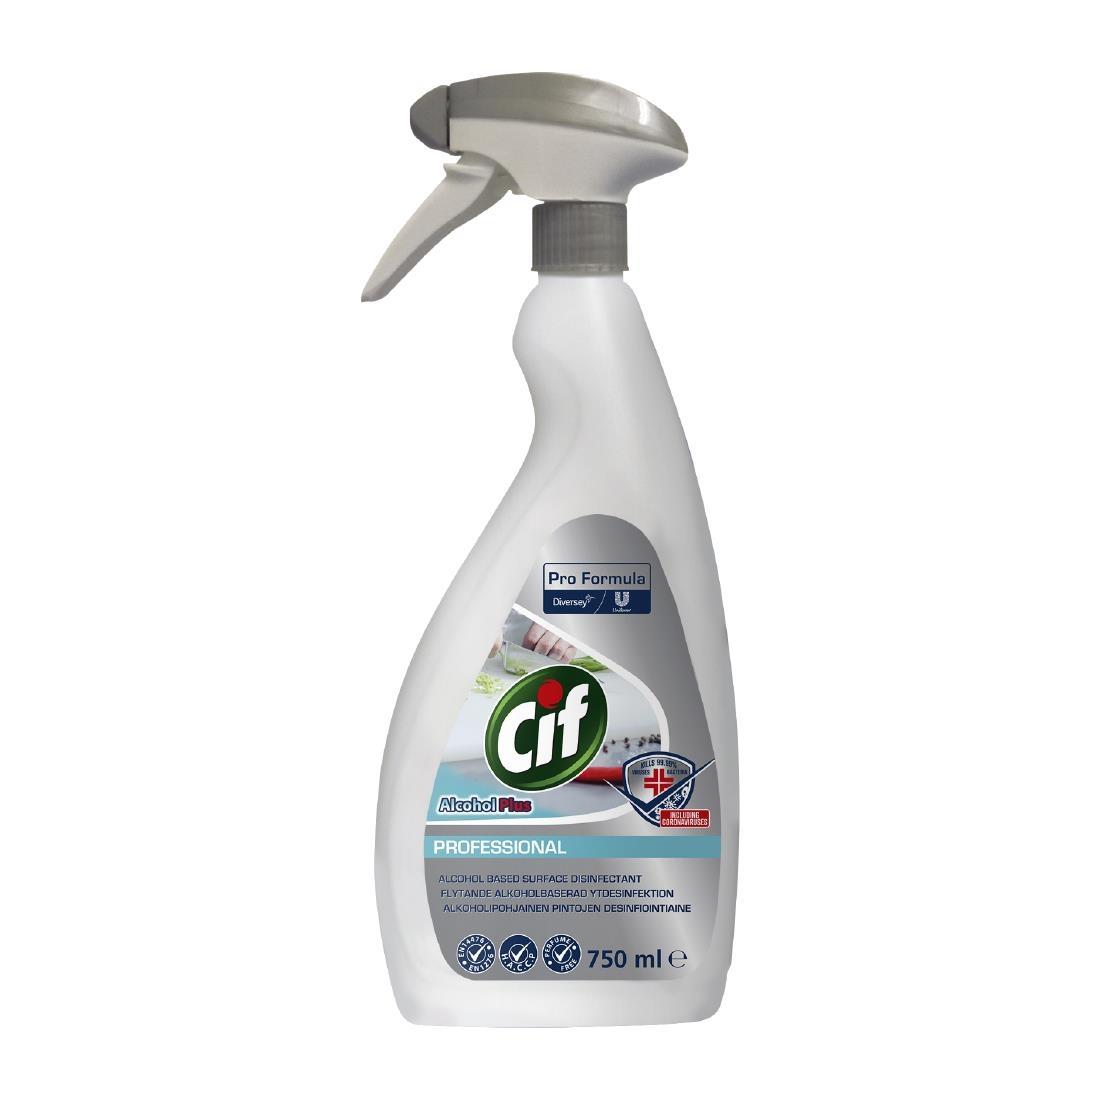 Cif Pro Formula Alcohol Plus Surface Disinfectant Ready To Use 750ml (6 Pack) - FT009  - 1